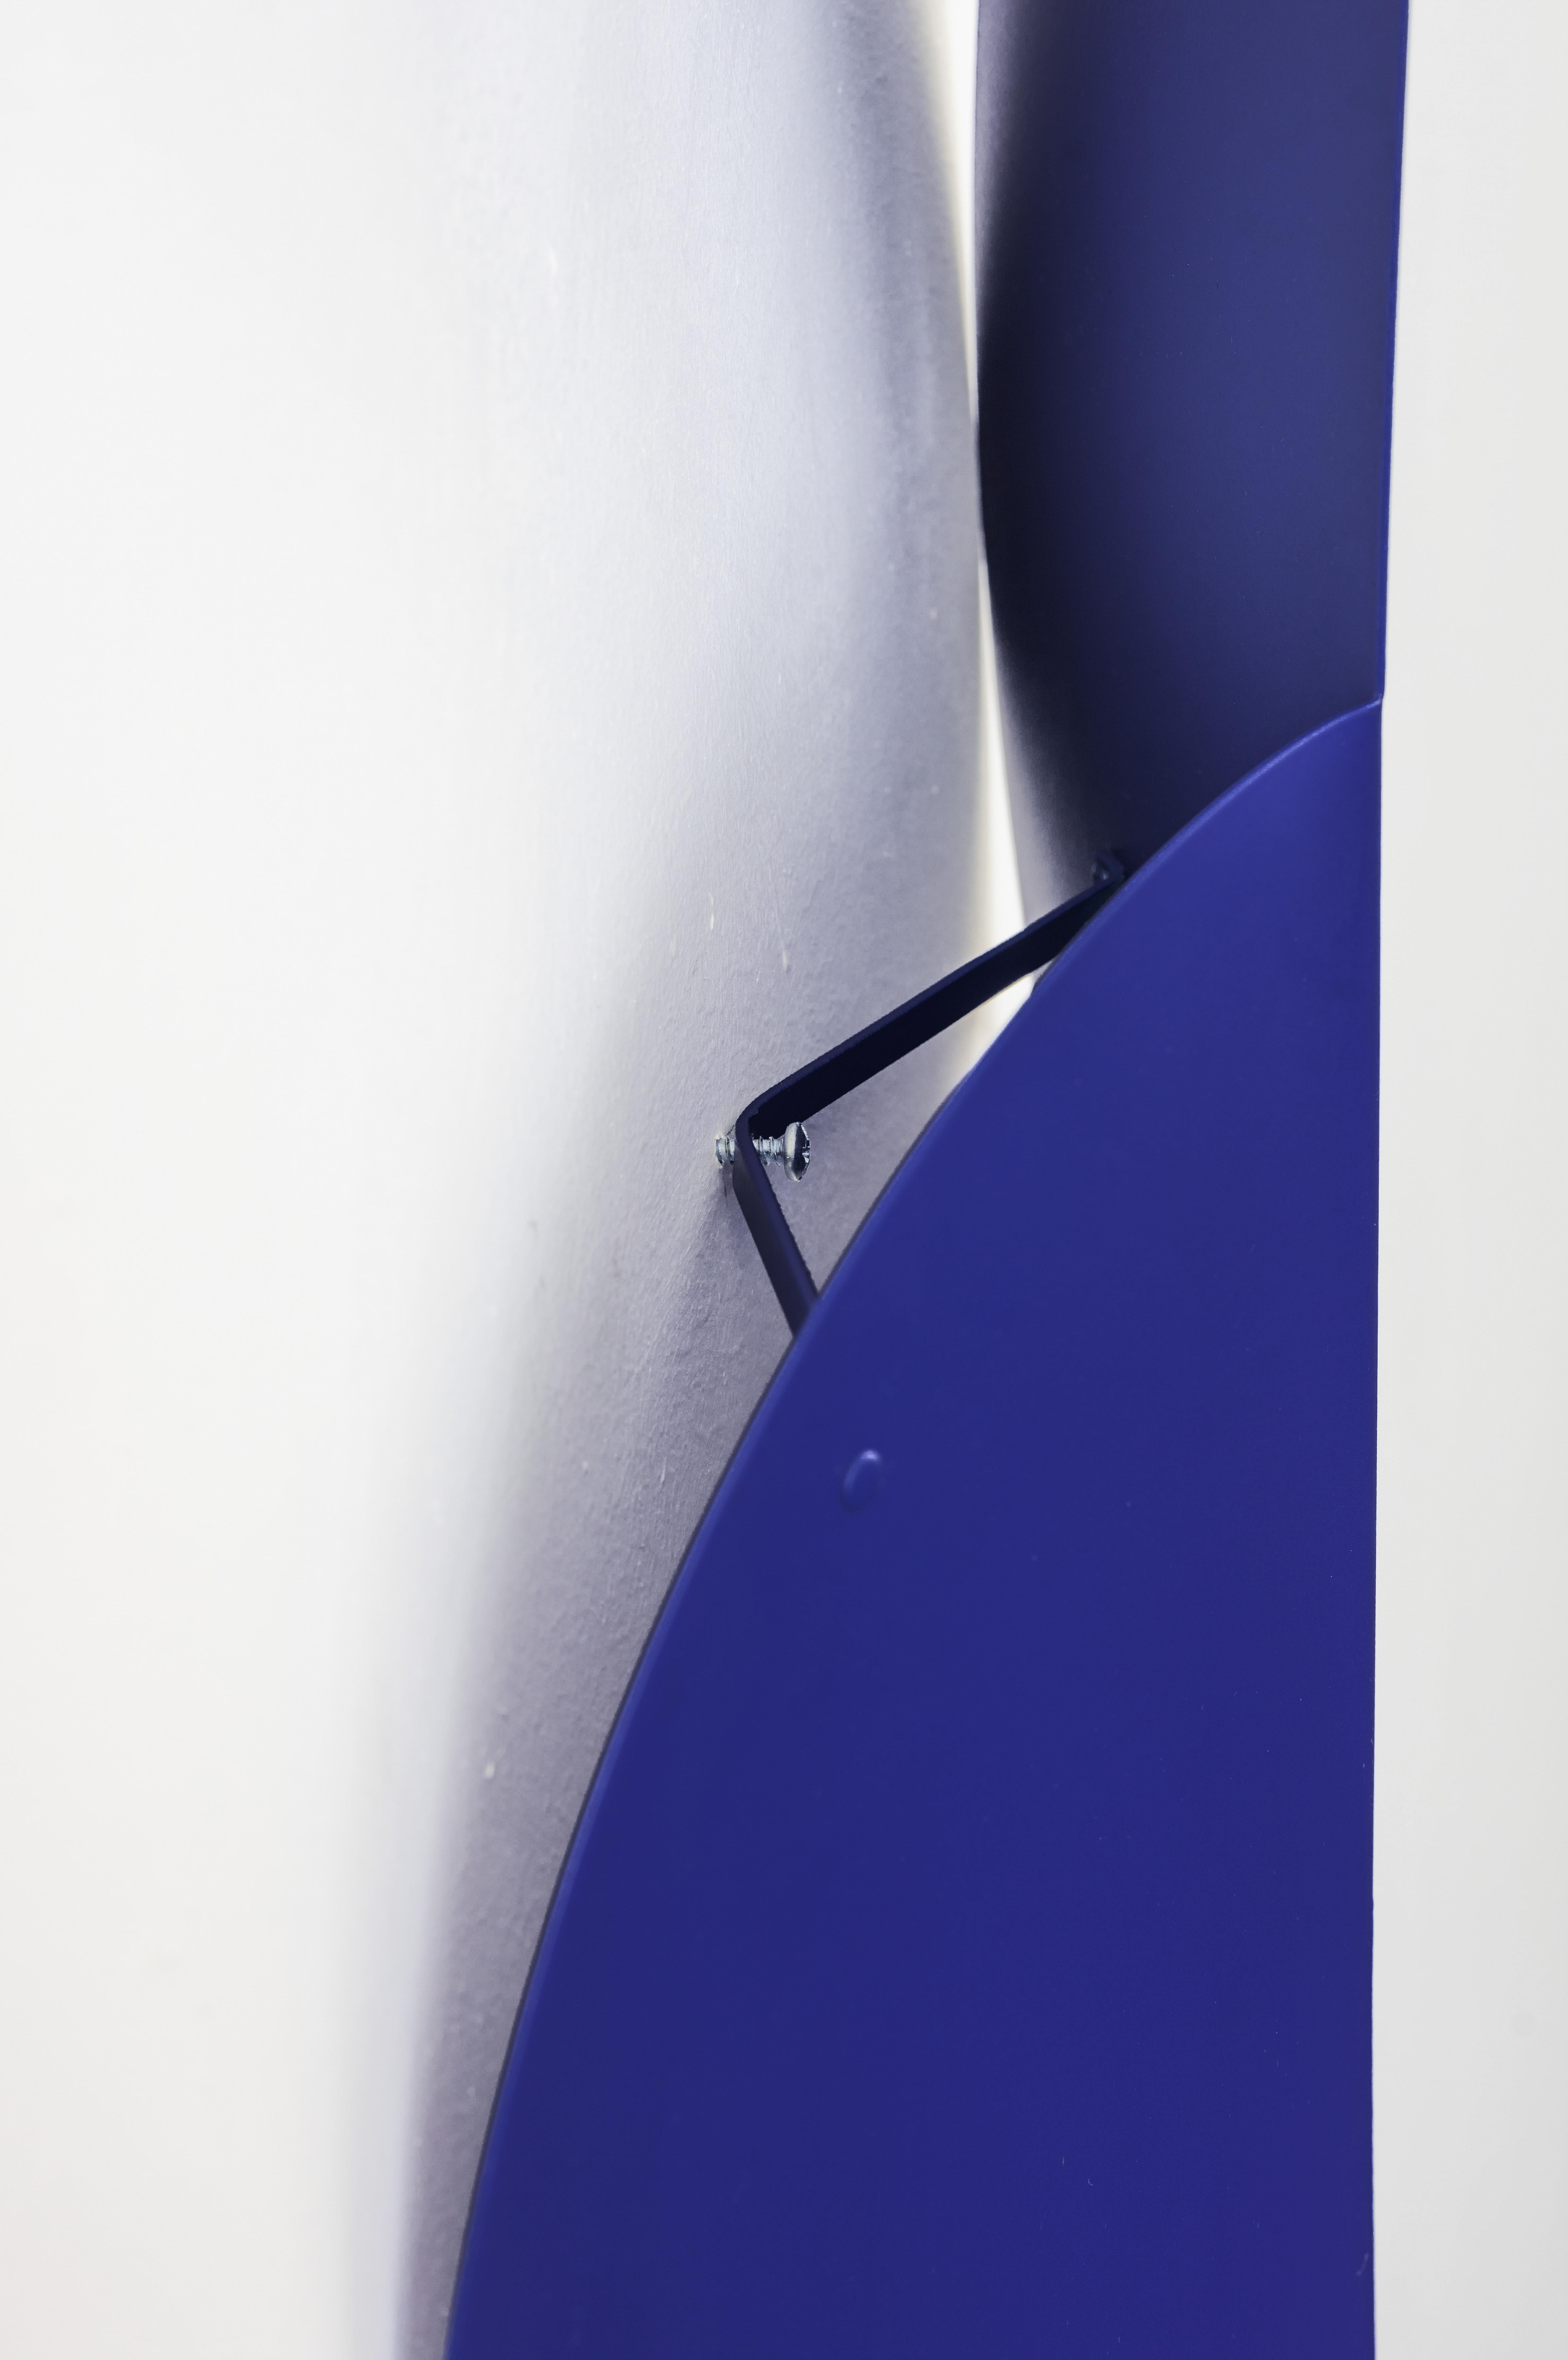 The two fold wall hanging in cobalt is a modern exploration of shape, fold, and color inspired by Bauhaus design principles of simplicity and geometrical form. It can be displayed solo or with other pieces in the Fold Collection. Its powder coating